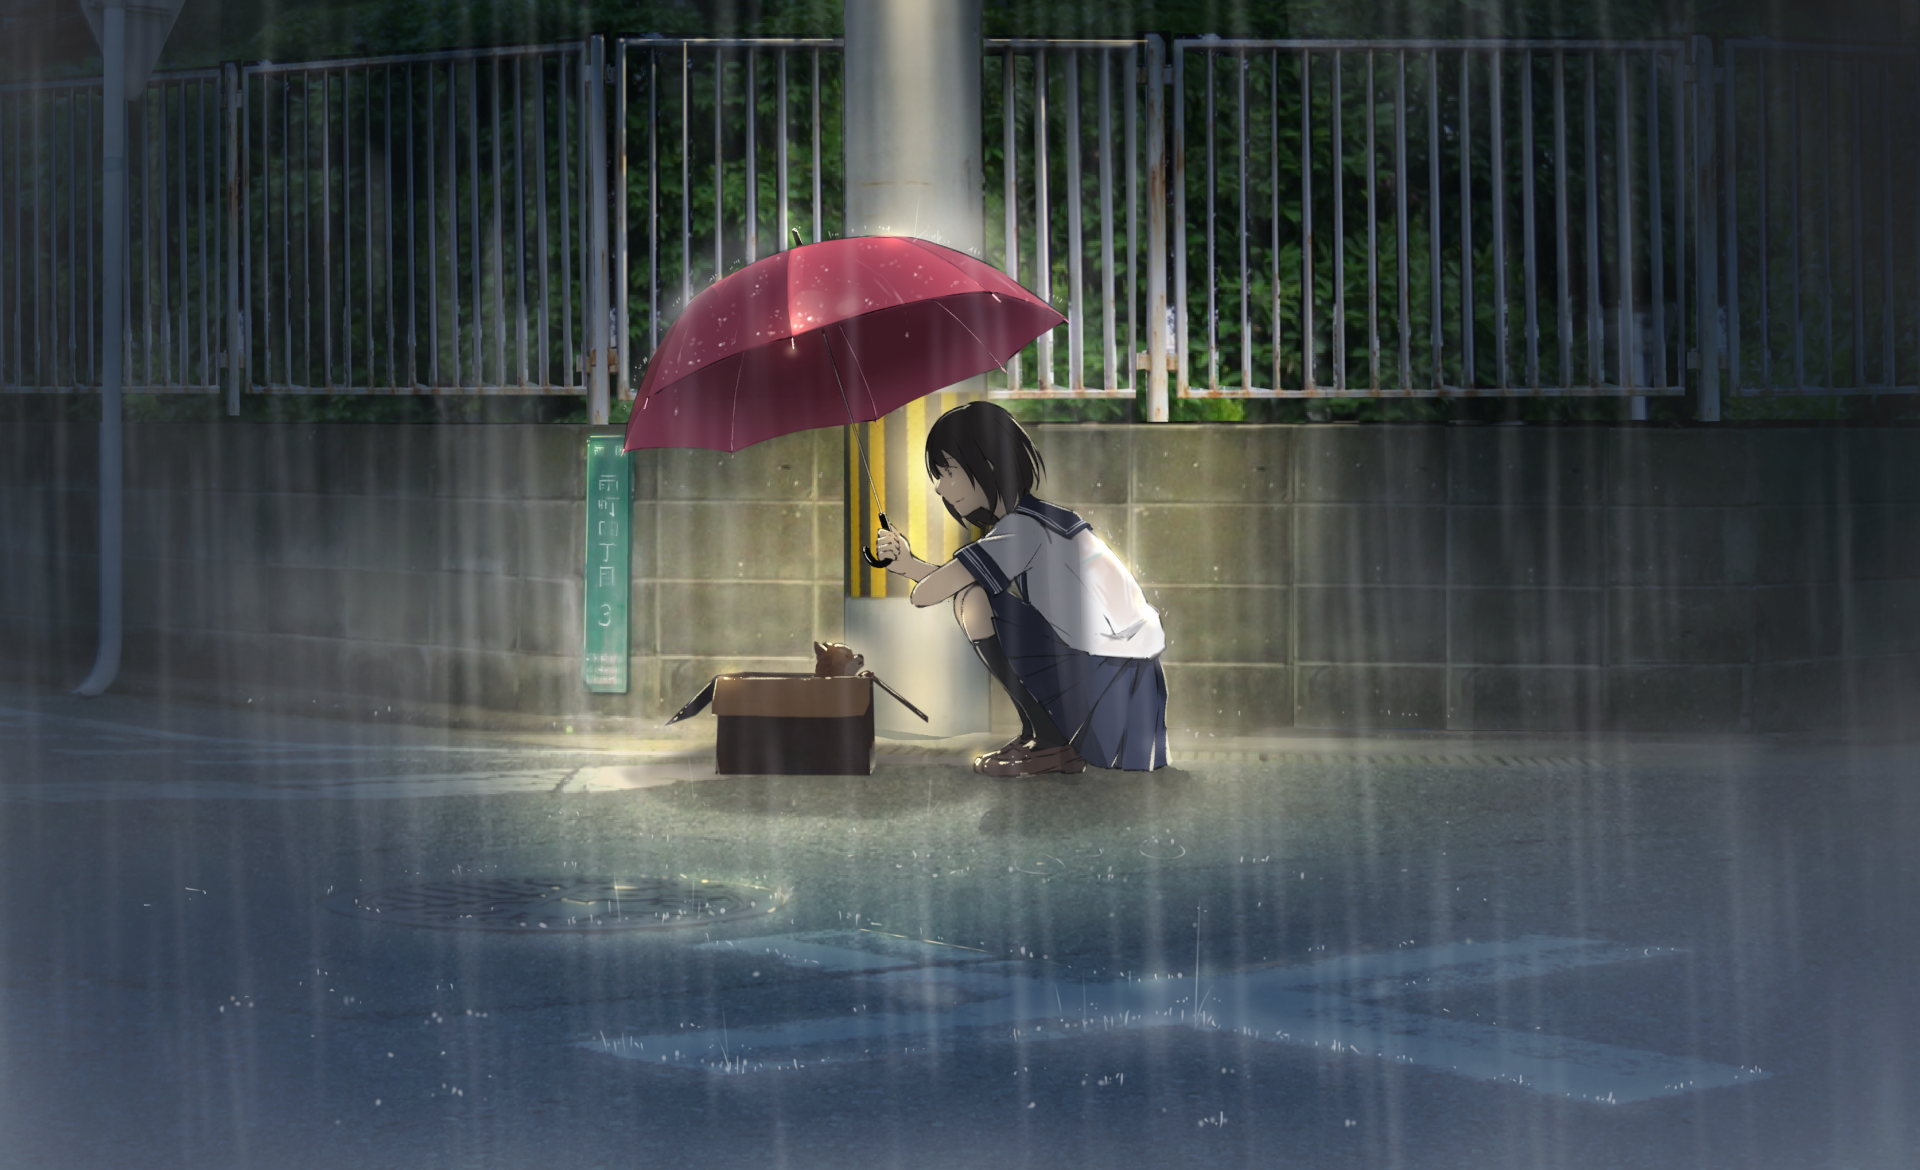 A serene Anime wallpaper featuring a figure with an umbrella under the rain at night, creating a peaceful and contemplative scene.